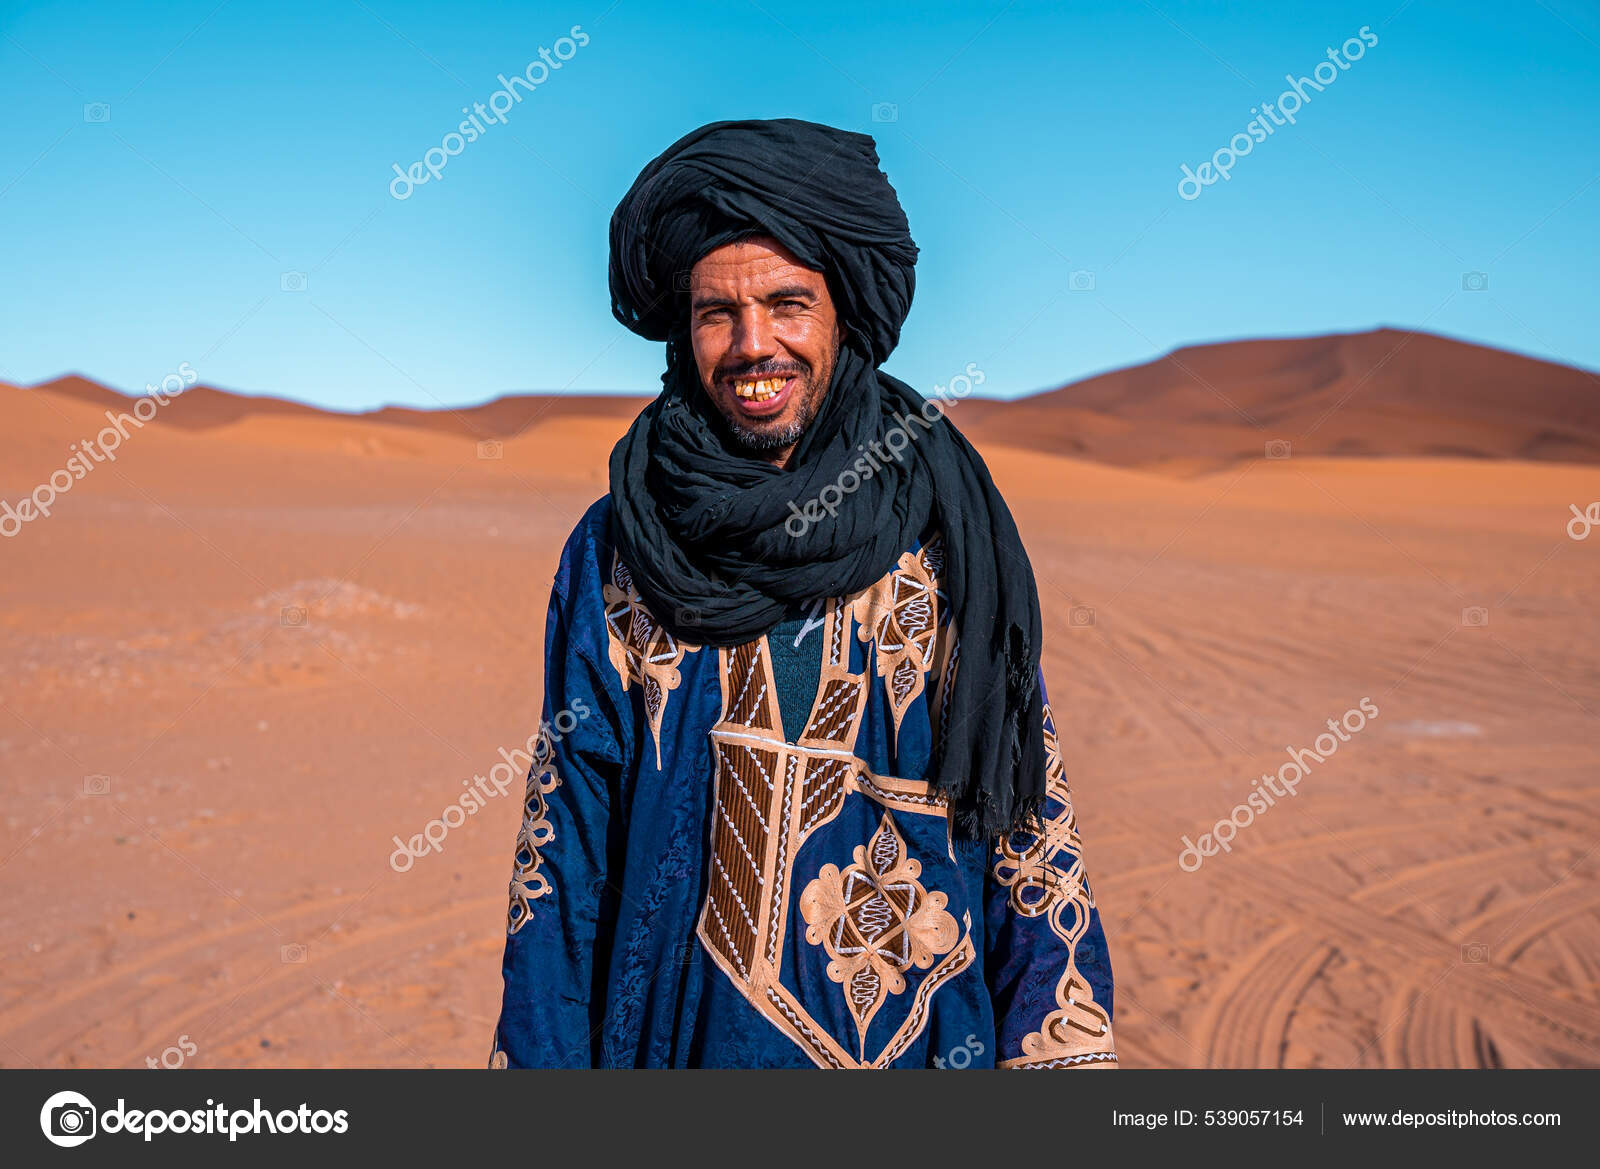 Bedouin man wears traditional clothes while standing in desert